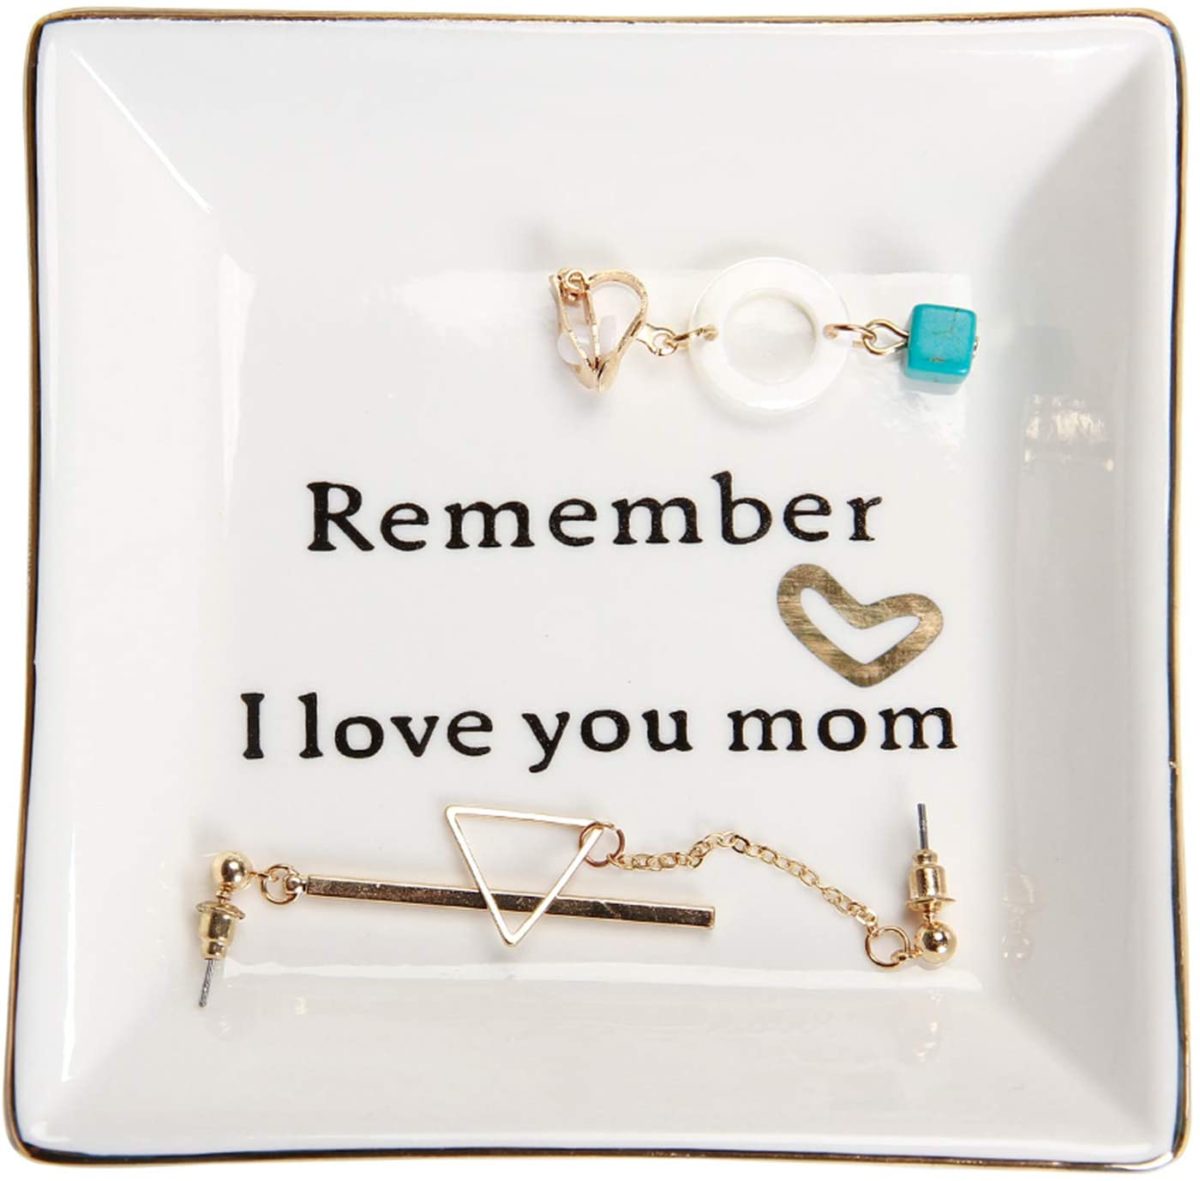 Show Your Mom Some Love This Valentine’s Day, Here Are Some Gifts She’d Love to Receive